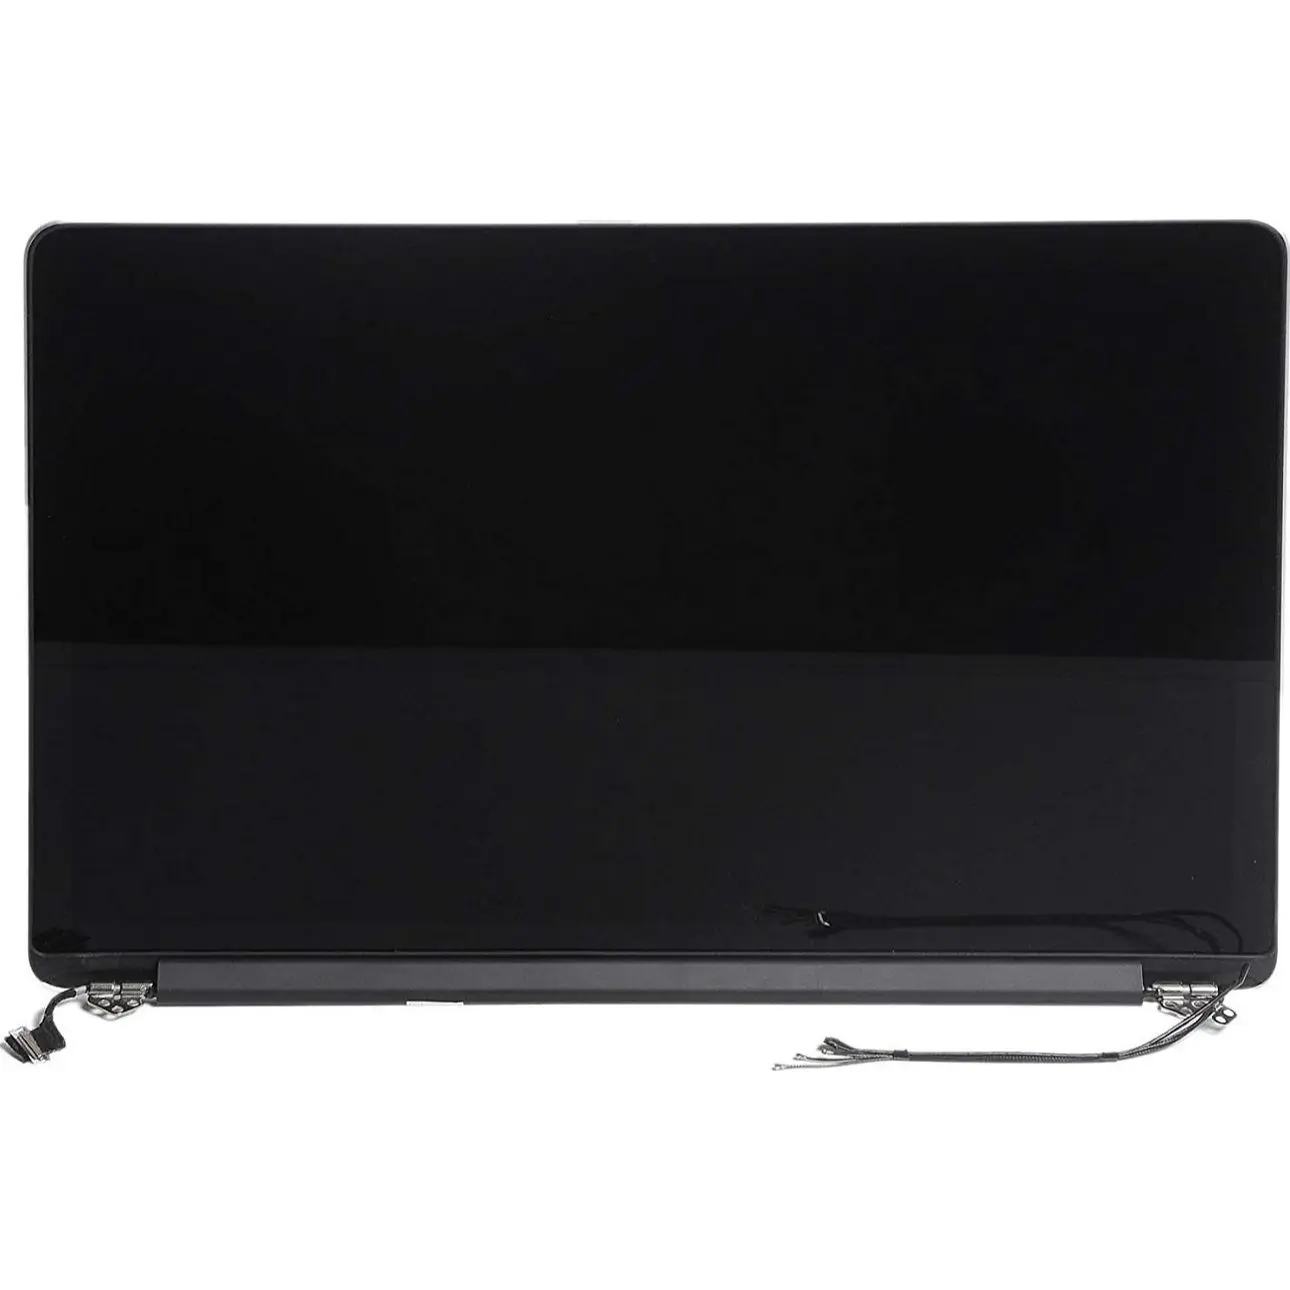 Apple Full Display Assembly with Cover MacBook Pro A1398 EMC 2674 2745 2876 2811 Complete LED Screen Display Screens MAC 5